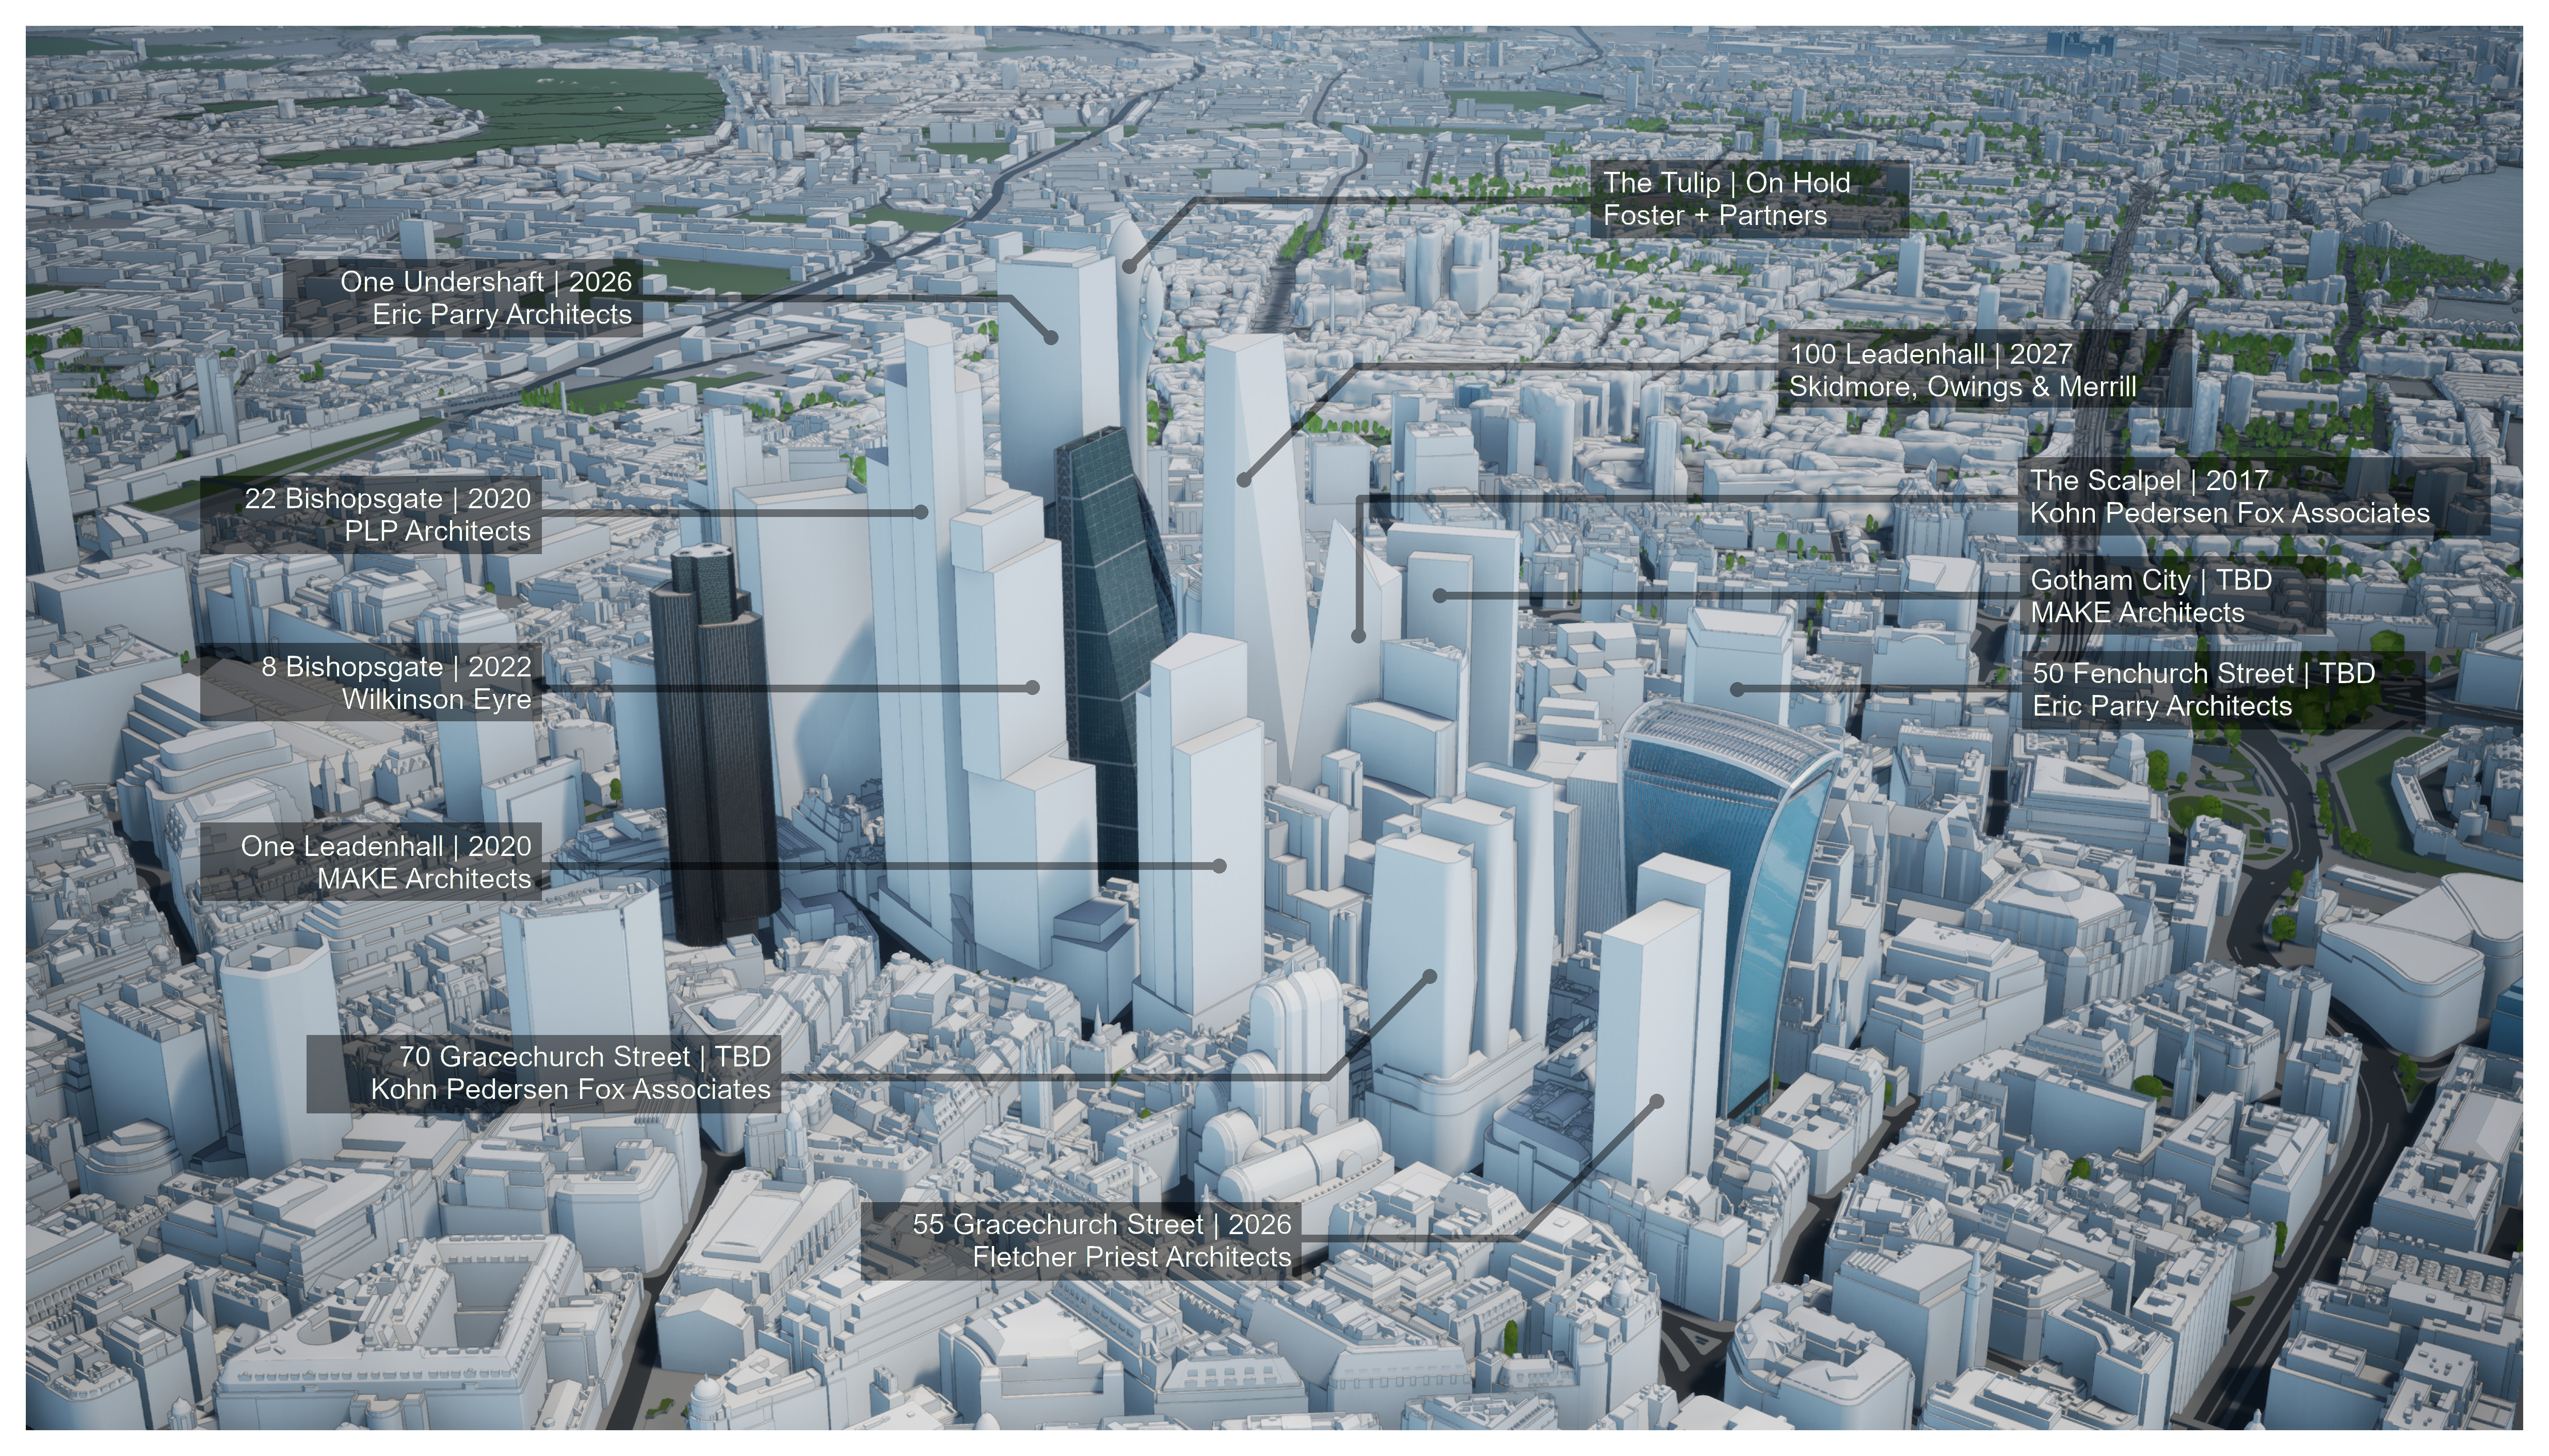 Architects of Future Skyline City of London AccuCities.jpg